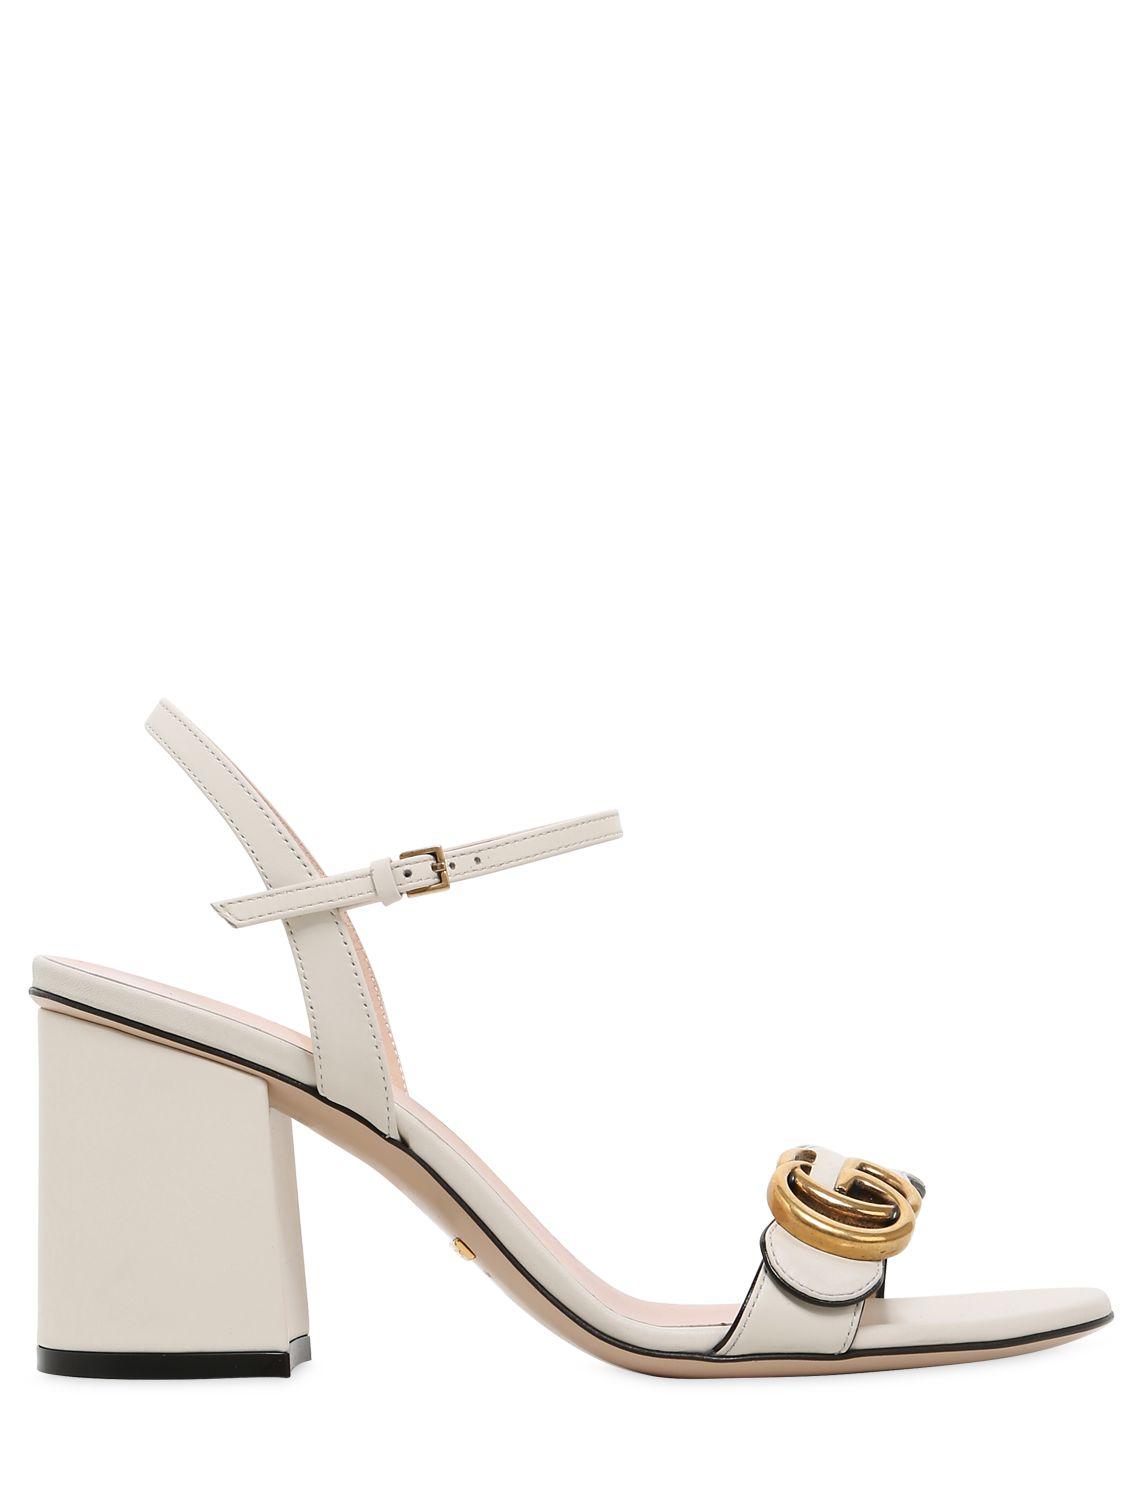 Gucci 75mm Marmont Gg Leather Sandals in White | Lyst